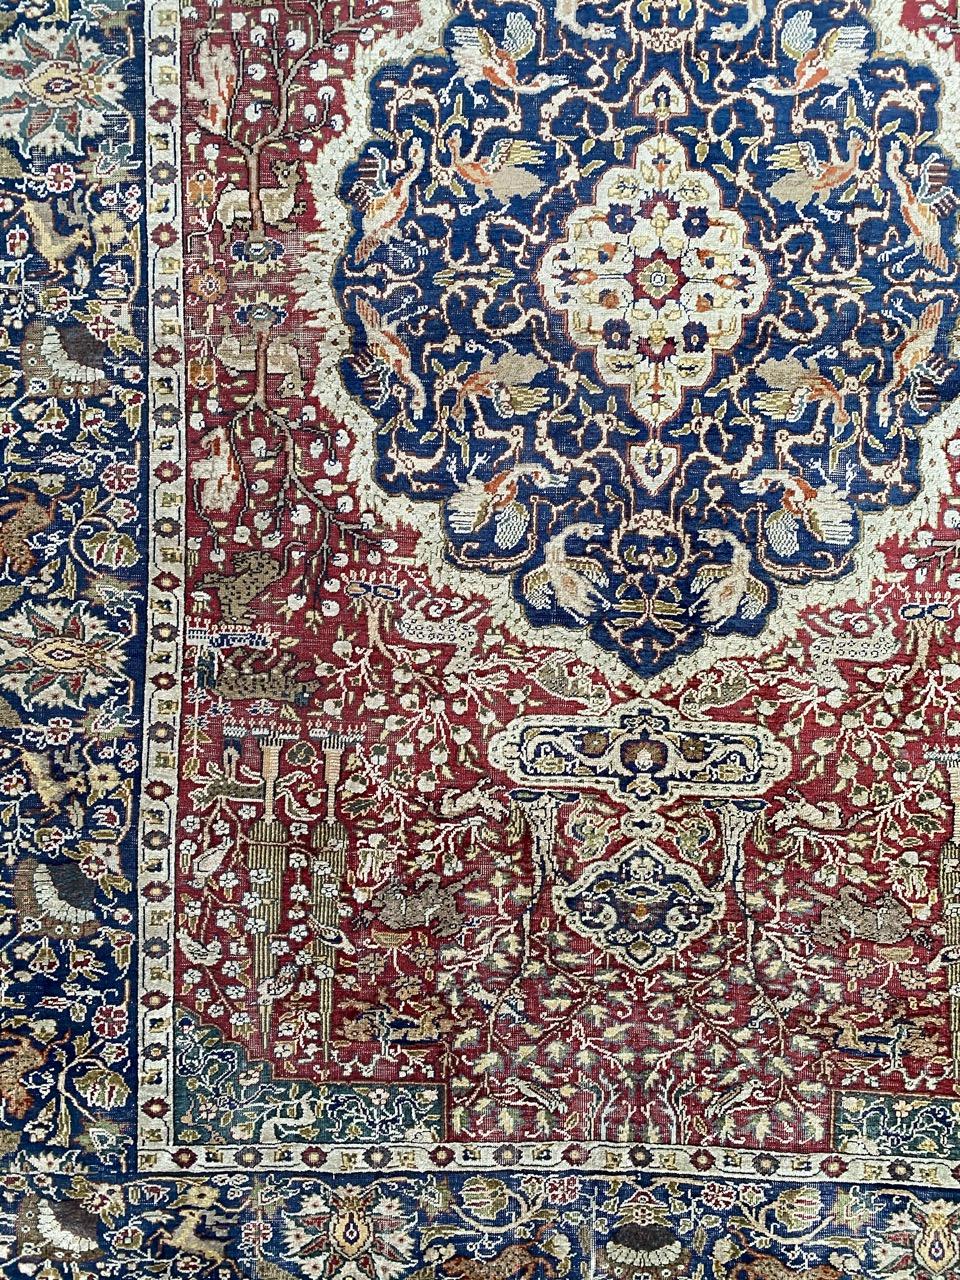 Wonderful early 20th century silk Turkish rug with beautiful 16th century style design and nice natural colors, entirely and finely hand knotted with silk velvet on cotton foundation.

✨✨✨
